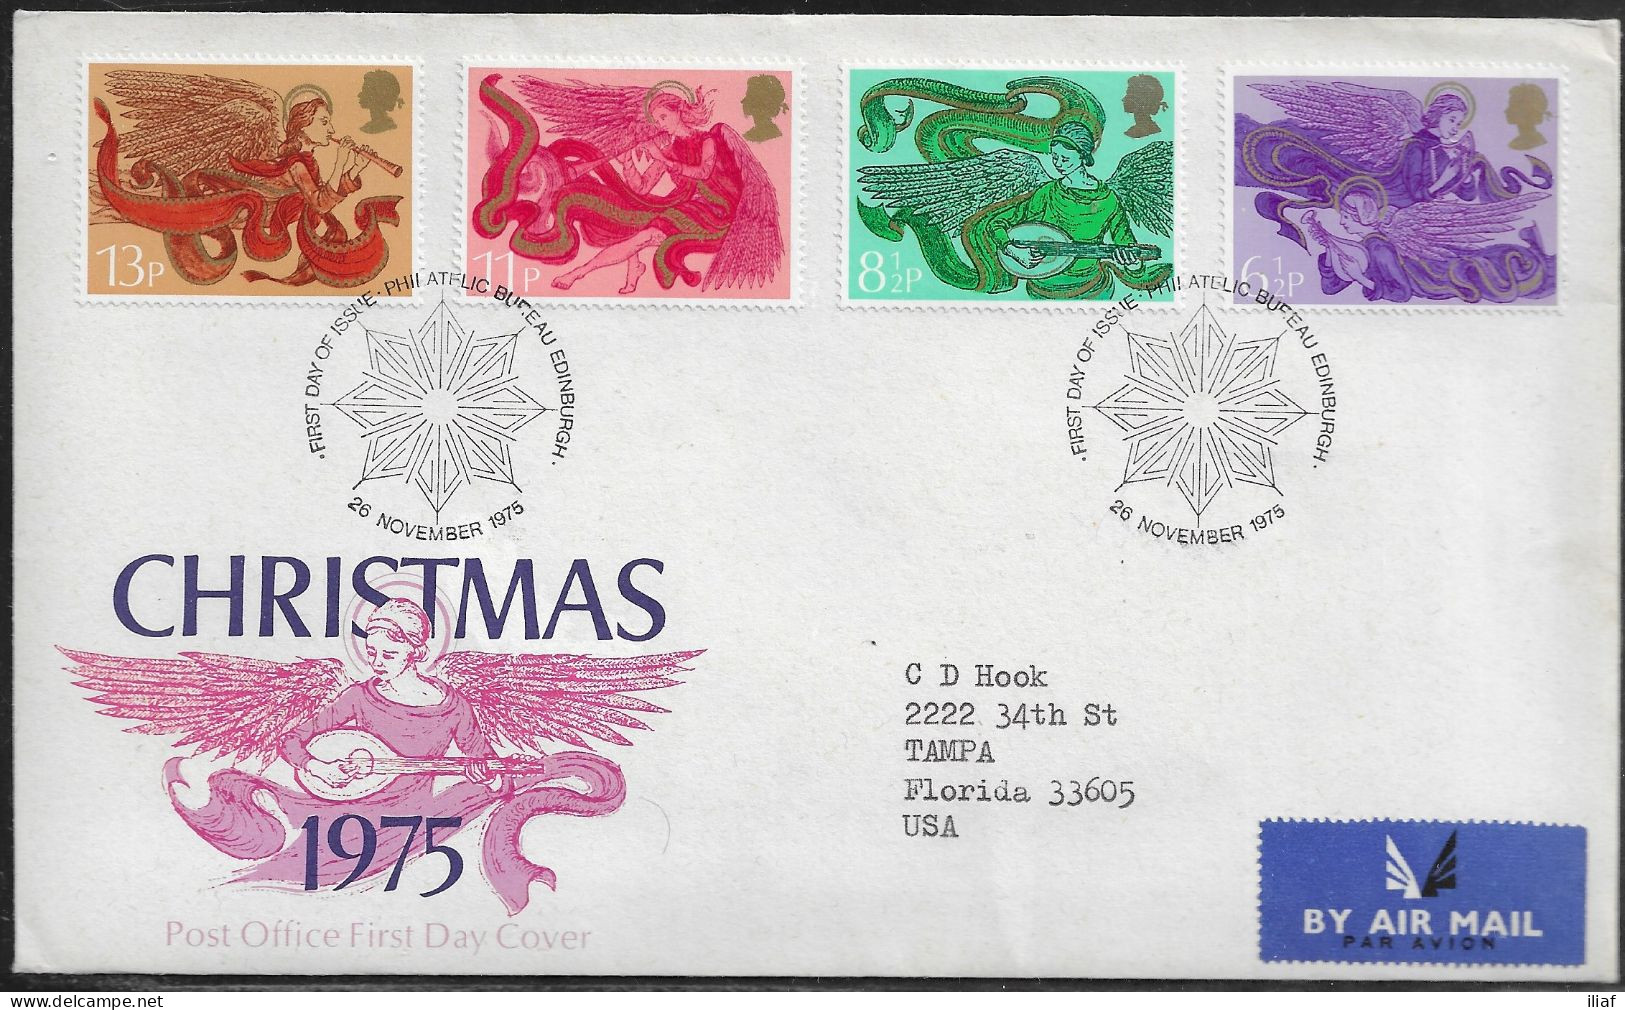 United Kingdom Of Great Britain.  FDC Sc. 758-761.  Christmas 1975 - Angels.  FDC Cancellation On FDC Envelope - 1971-1980 Dezimalausgaben